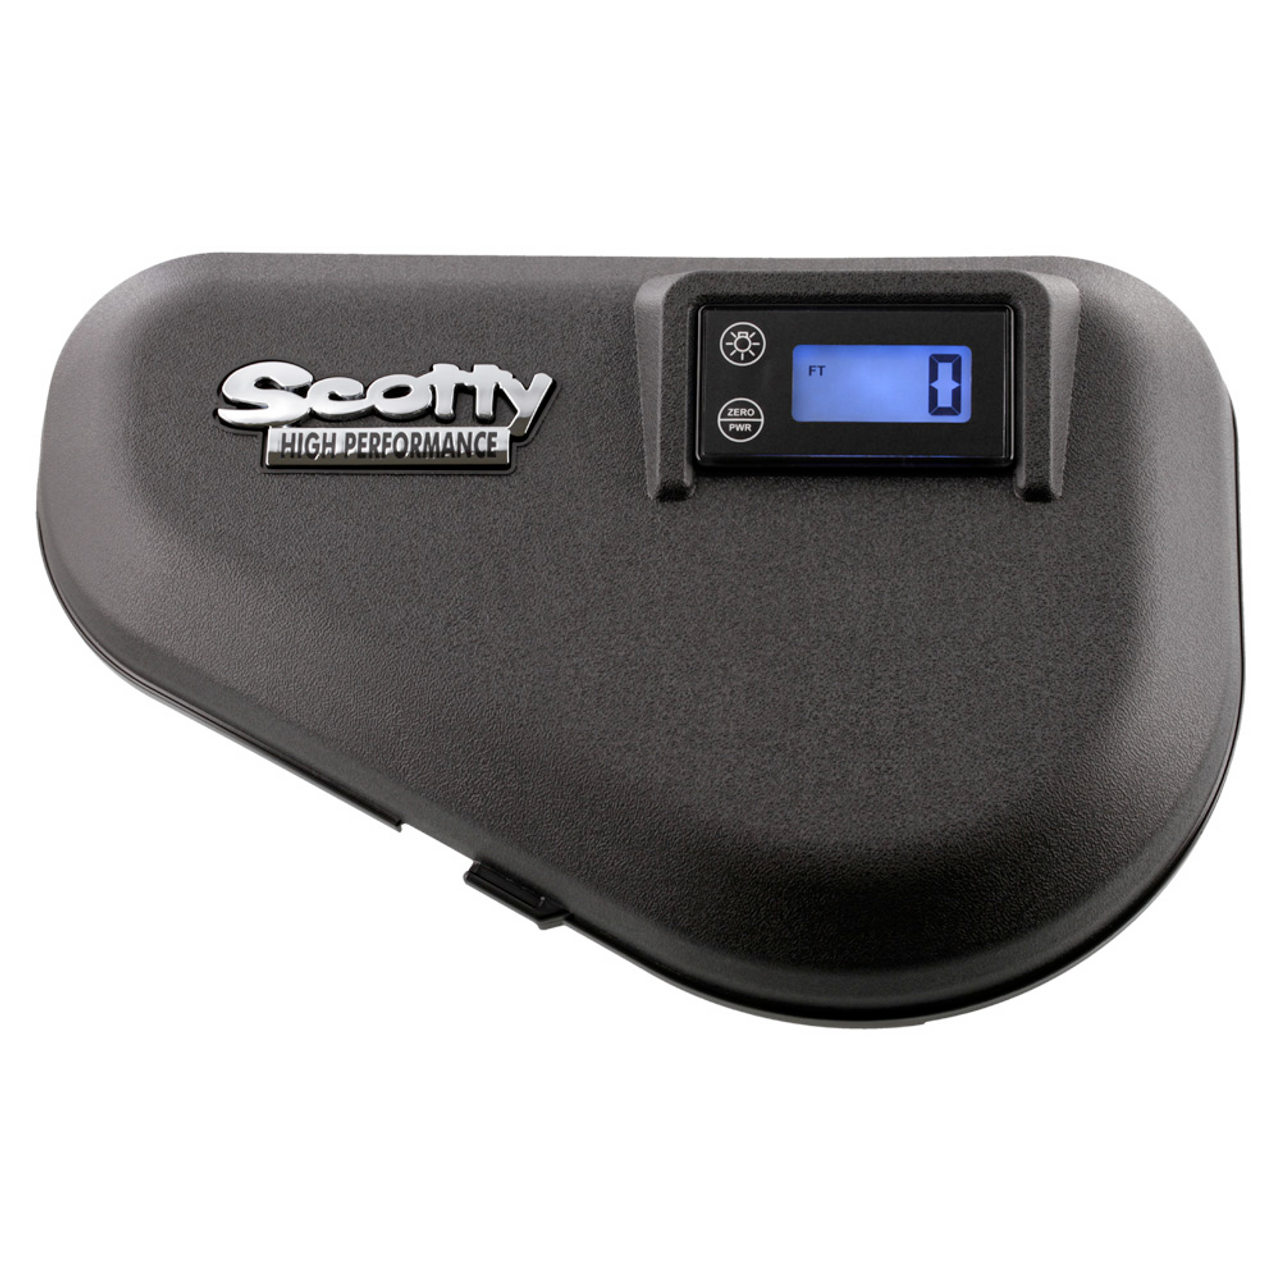 Scotty HP Downrigger Replacement Lid with LCD Counter